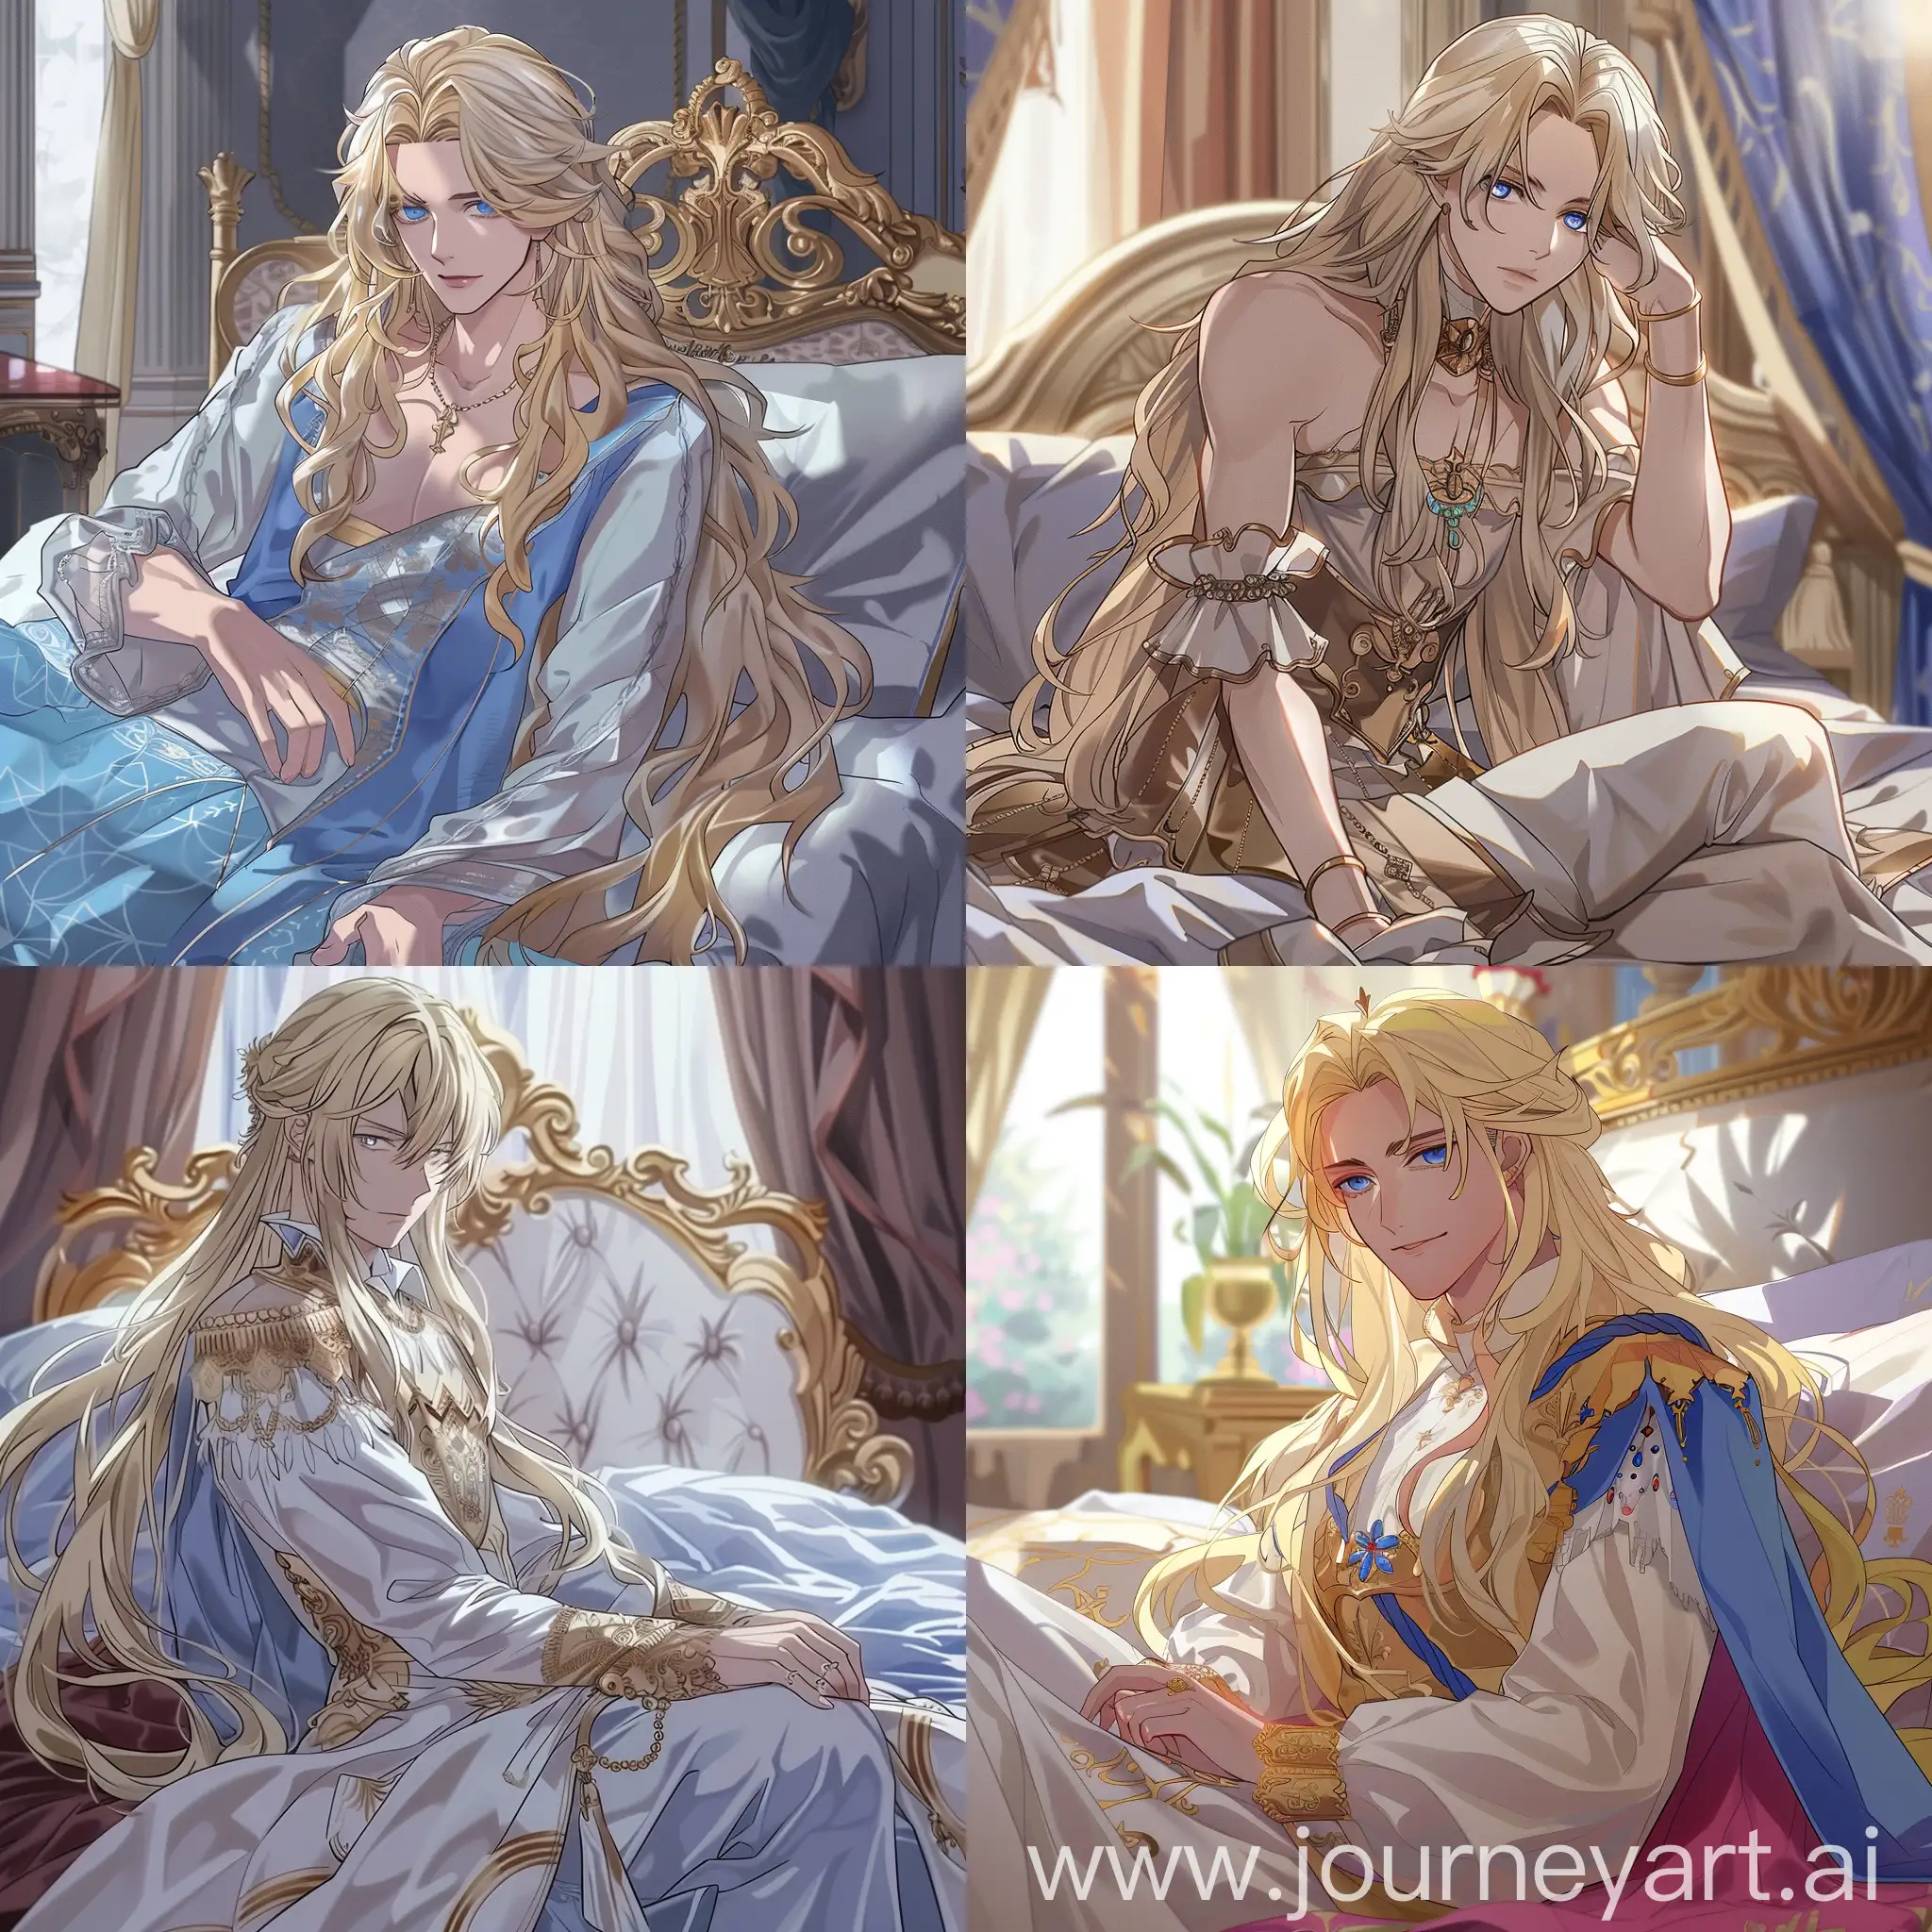 Blonde-Young-Man-in-Royal-Female-Attire-on-Bed-Anime-Style-Image